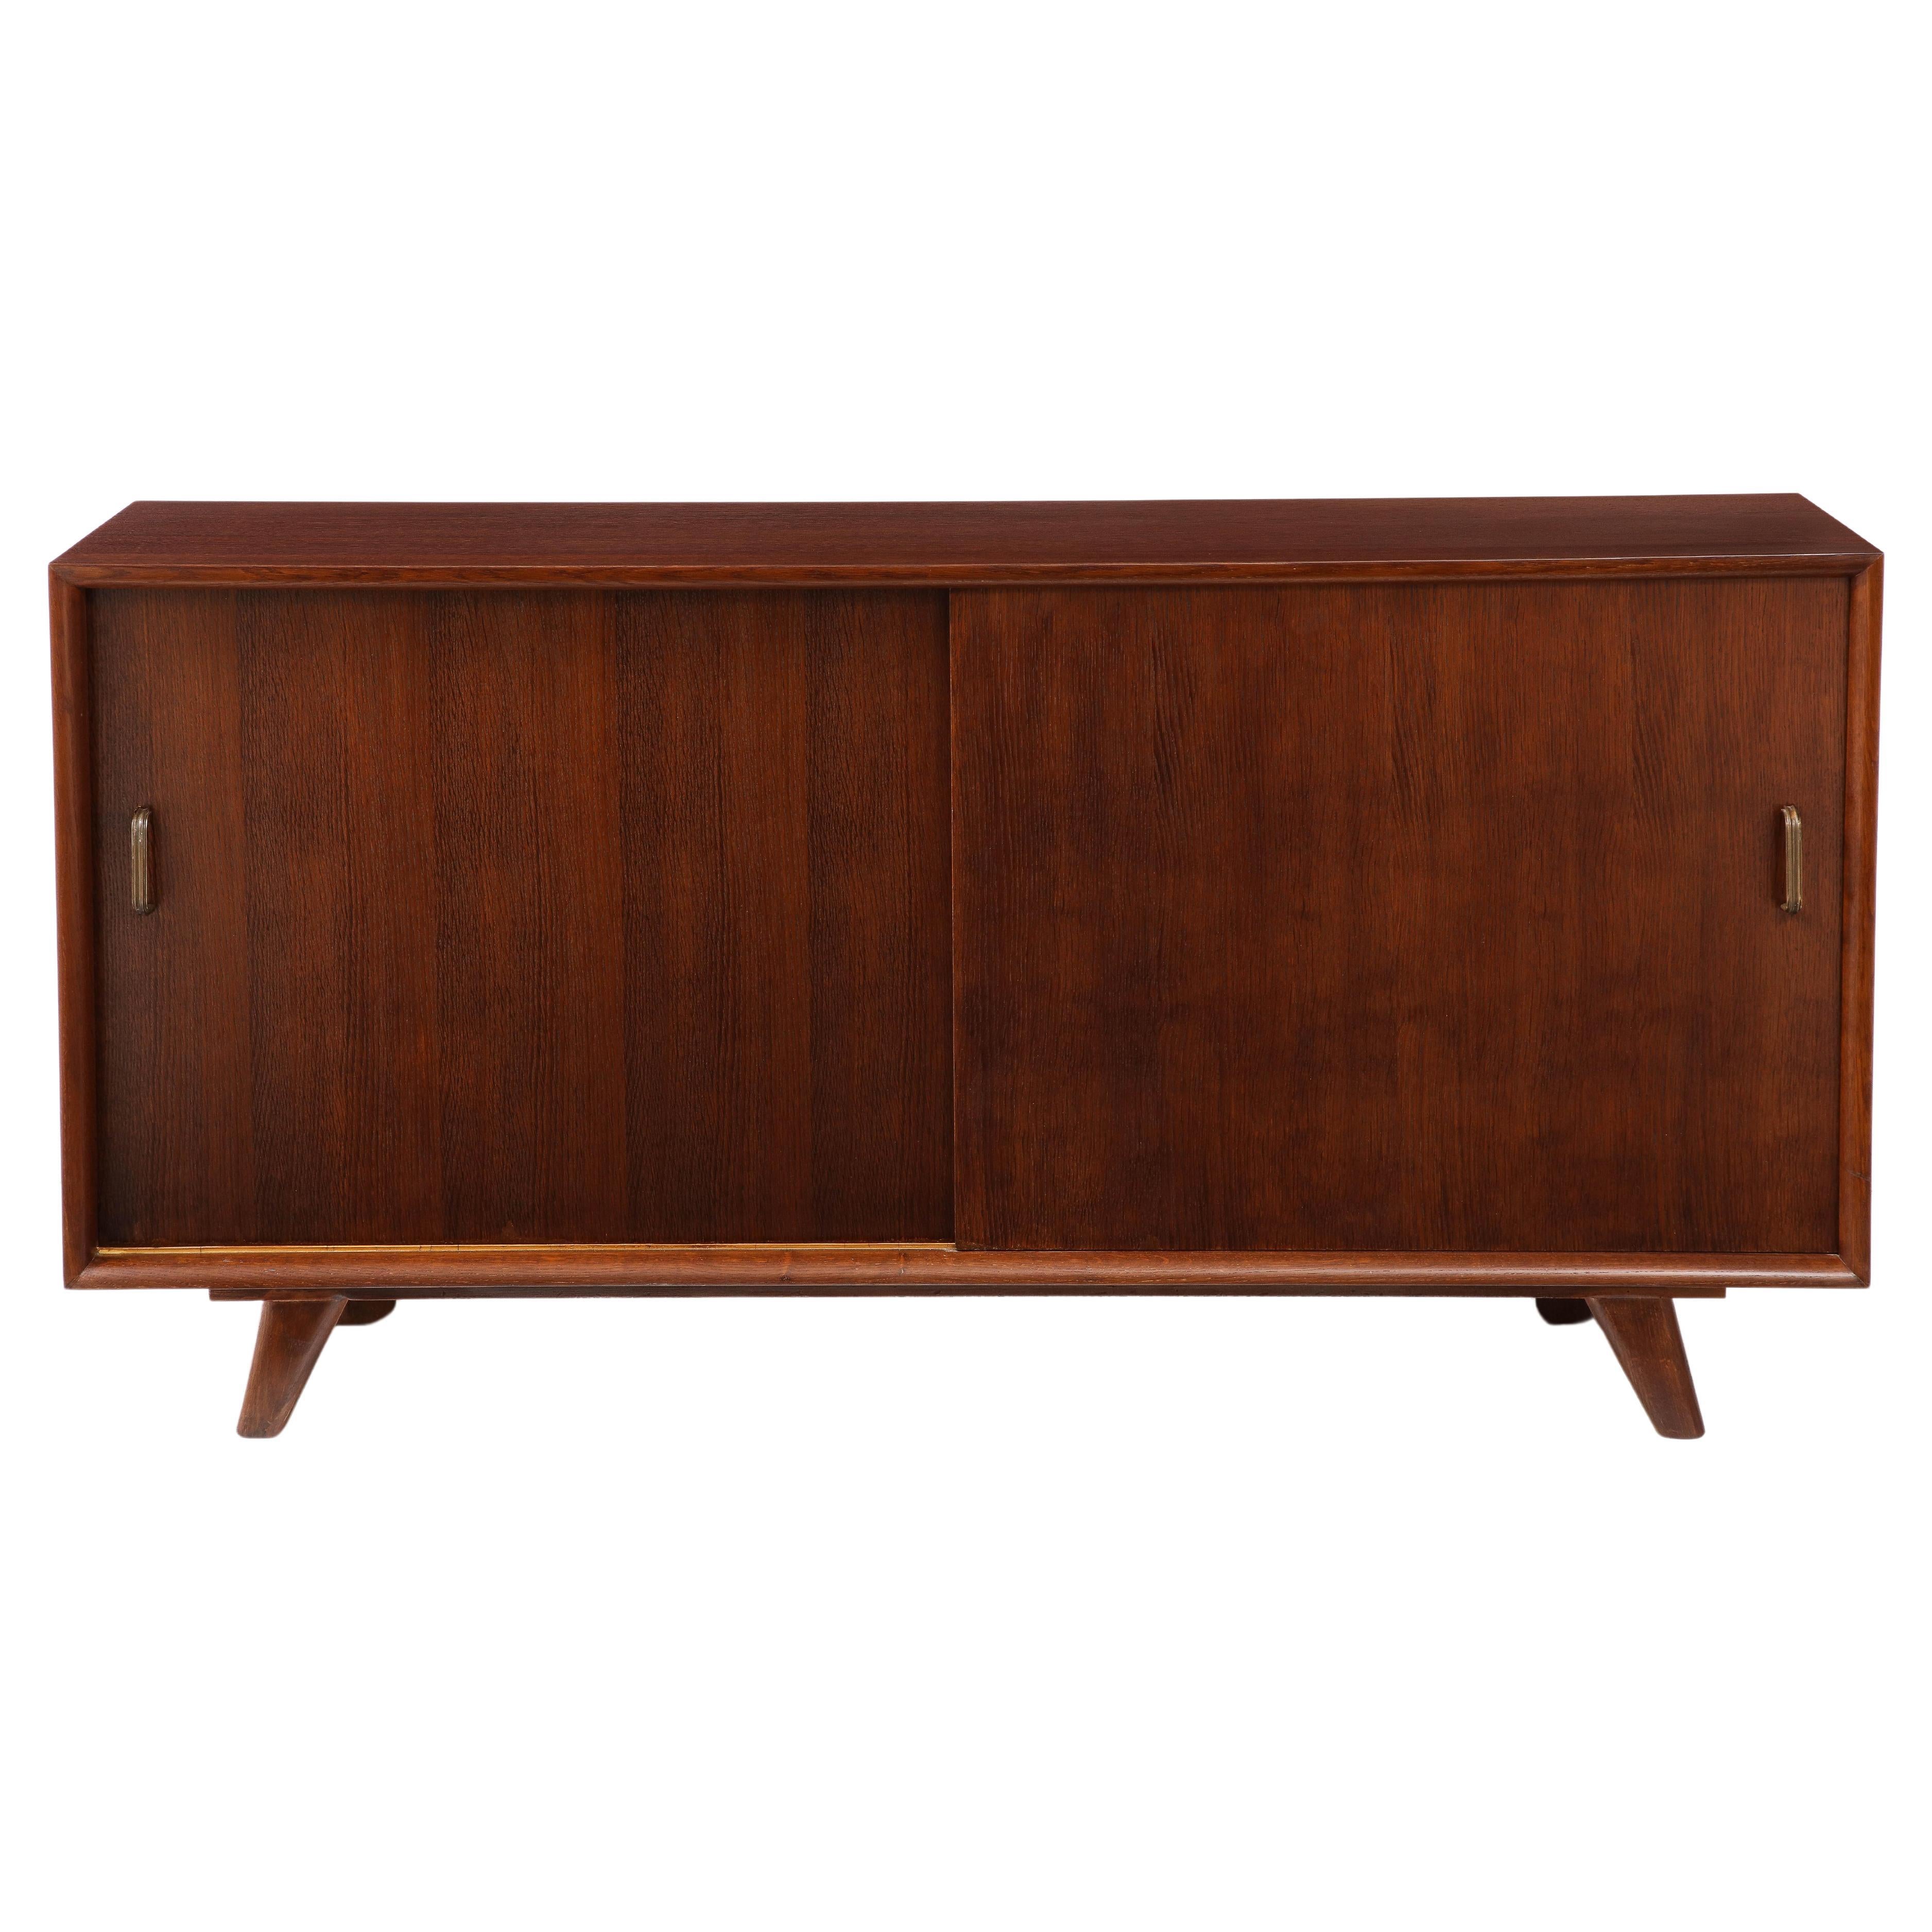 French Oak Sideboard with Sliding Doors & Shelves, 1950's For Sale